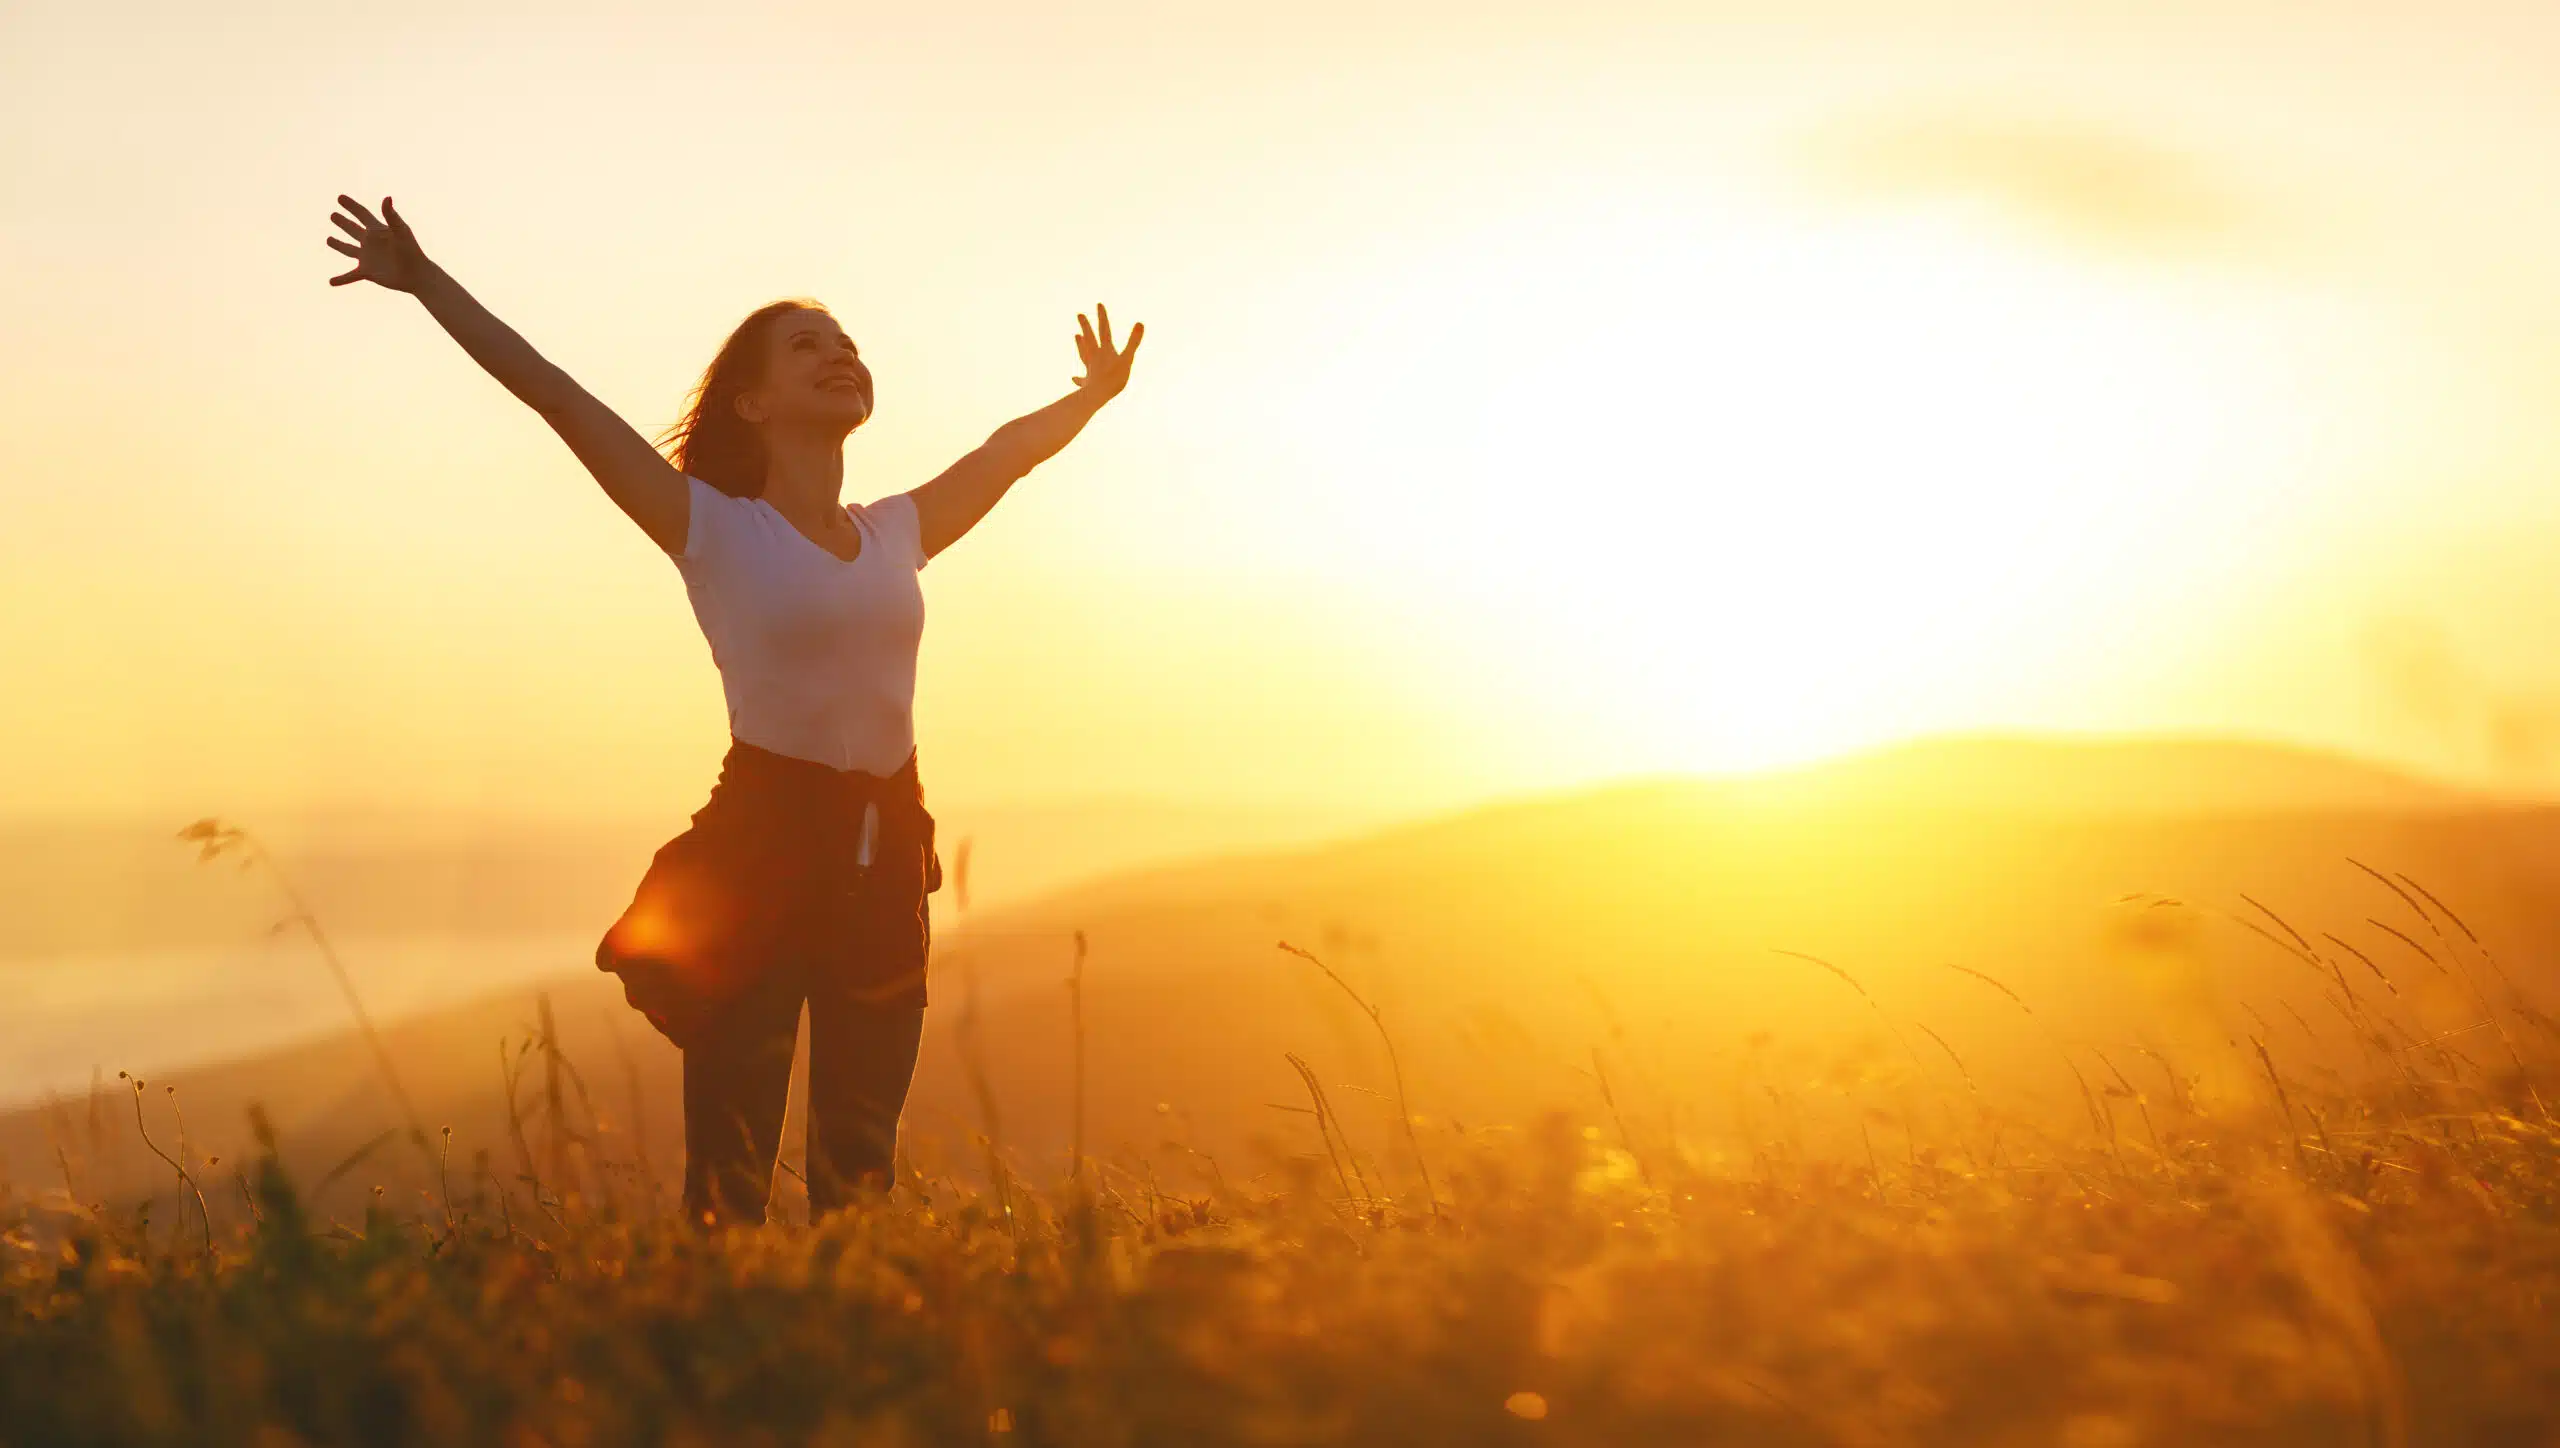 Woman smiling with arms outreached in a golden field with bright yellow sun shining in the background